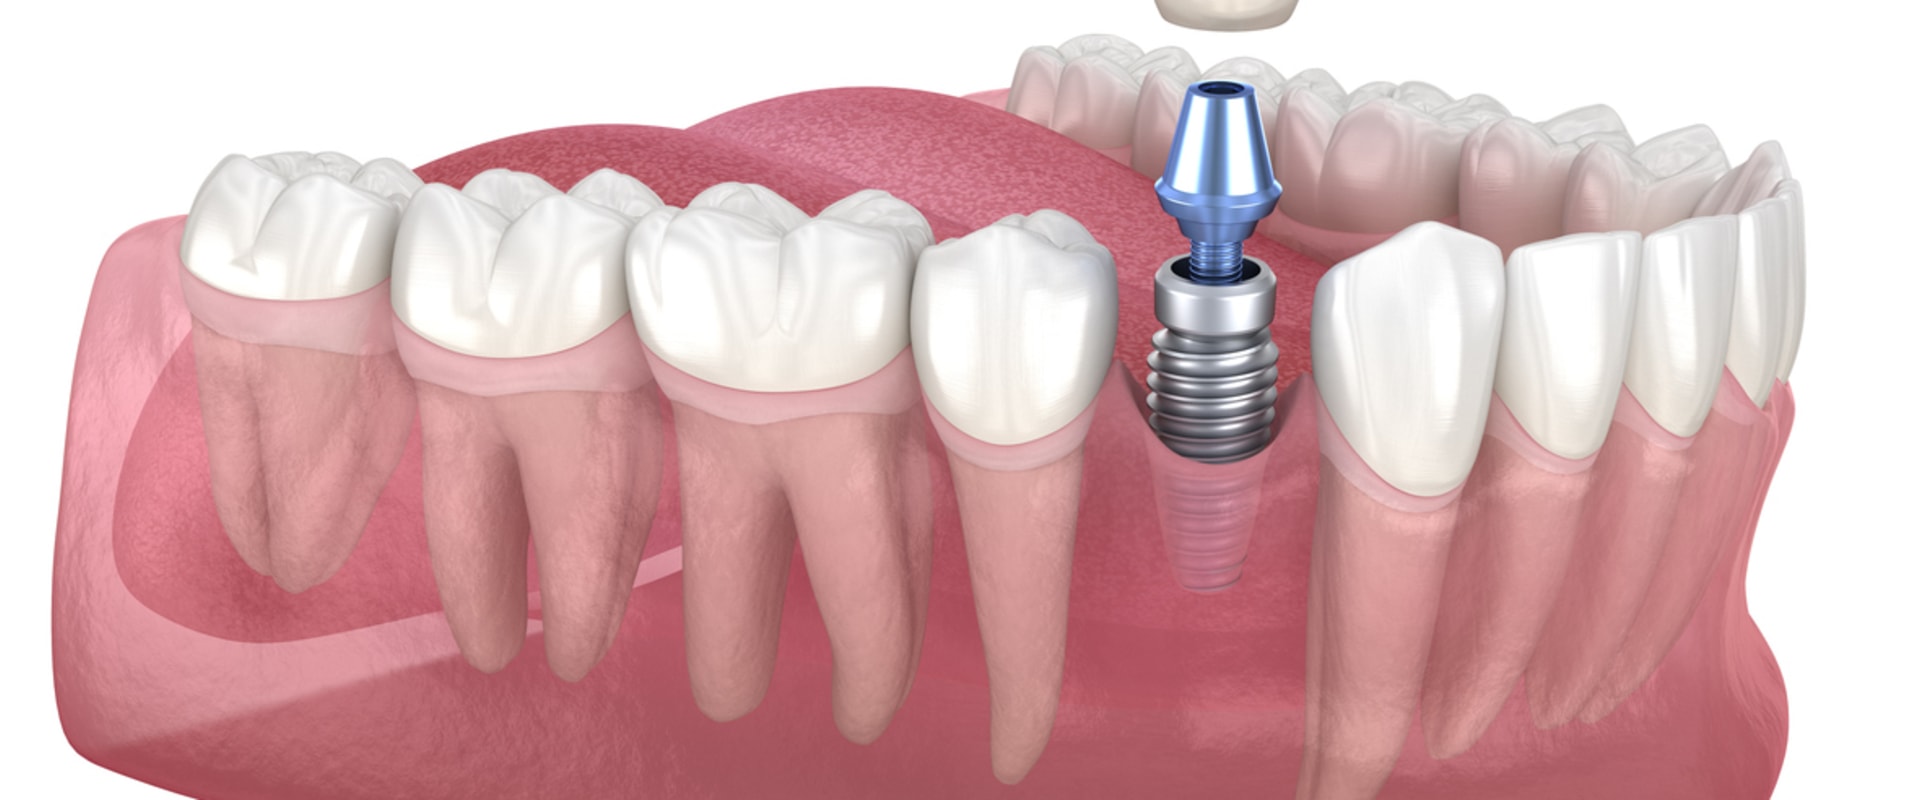 What are the downside of dental implants?